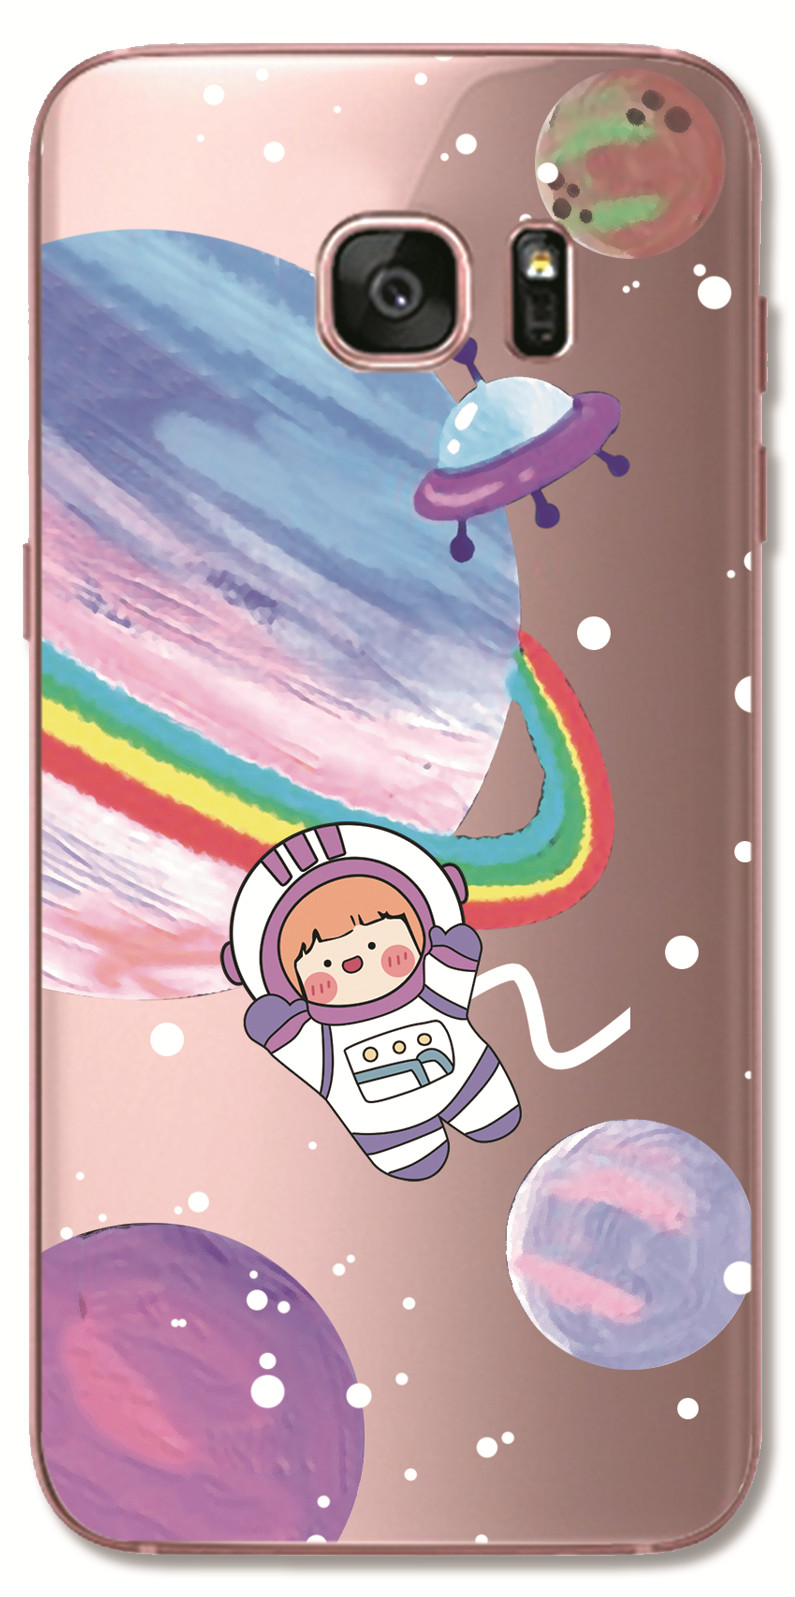 Samsung Galaxy S8 Plus / Note 4 5 3 2 N7100 N9000 INS Cute Cartoon Big eyes furry Monster Clear Soft Silicone TPU Phone Casing Lovely Space Astronaut Spaceship Case Back Cover Couple